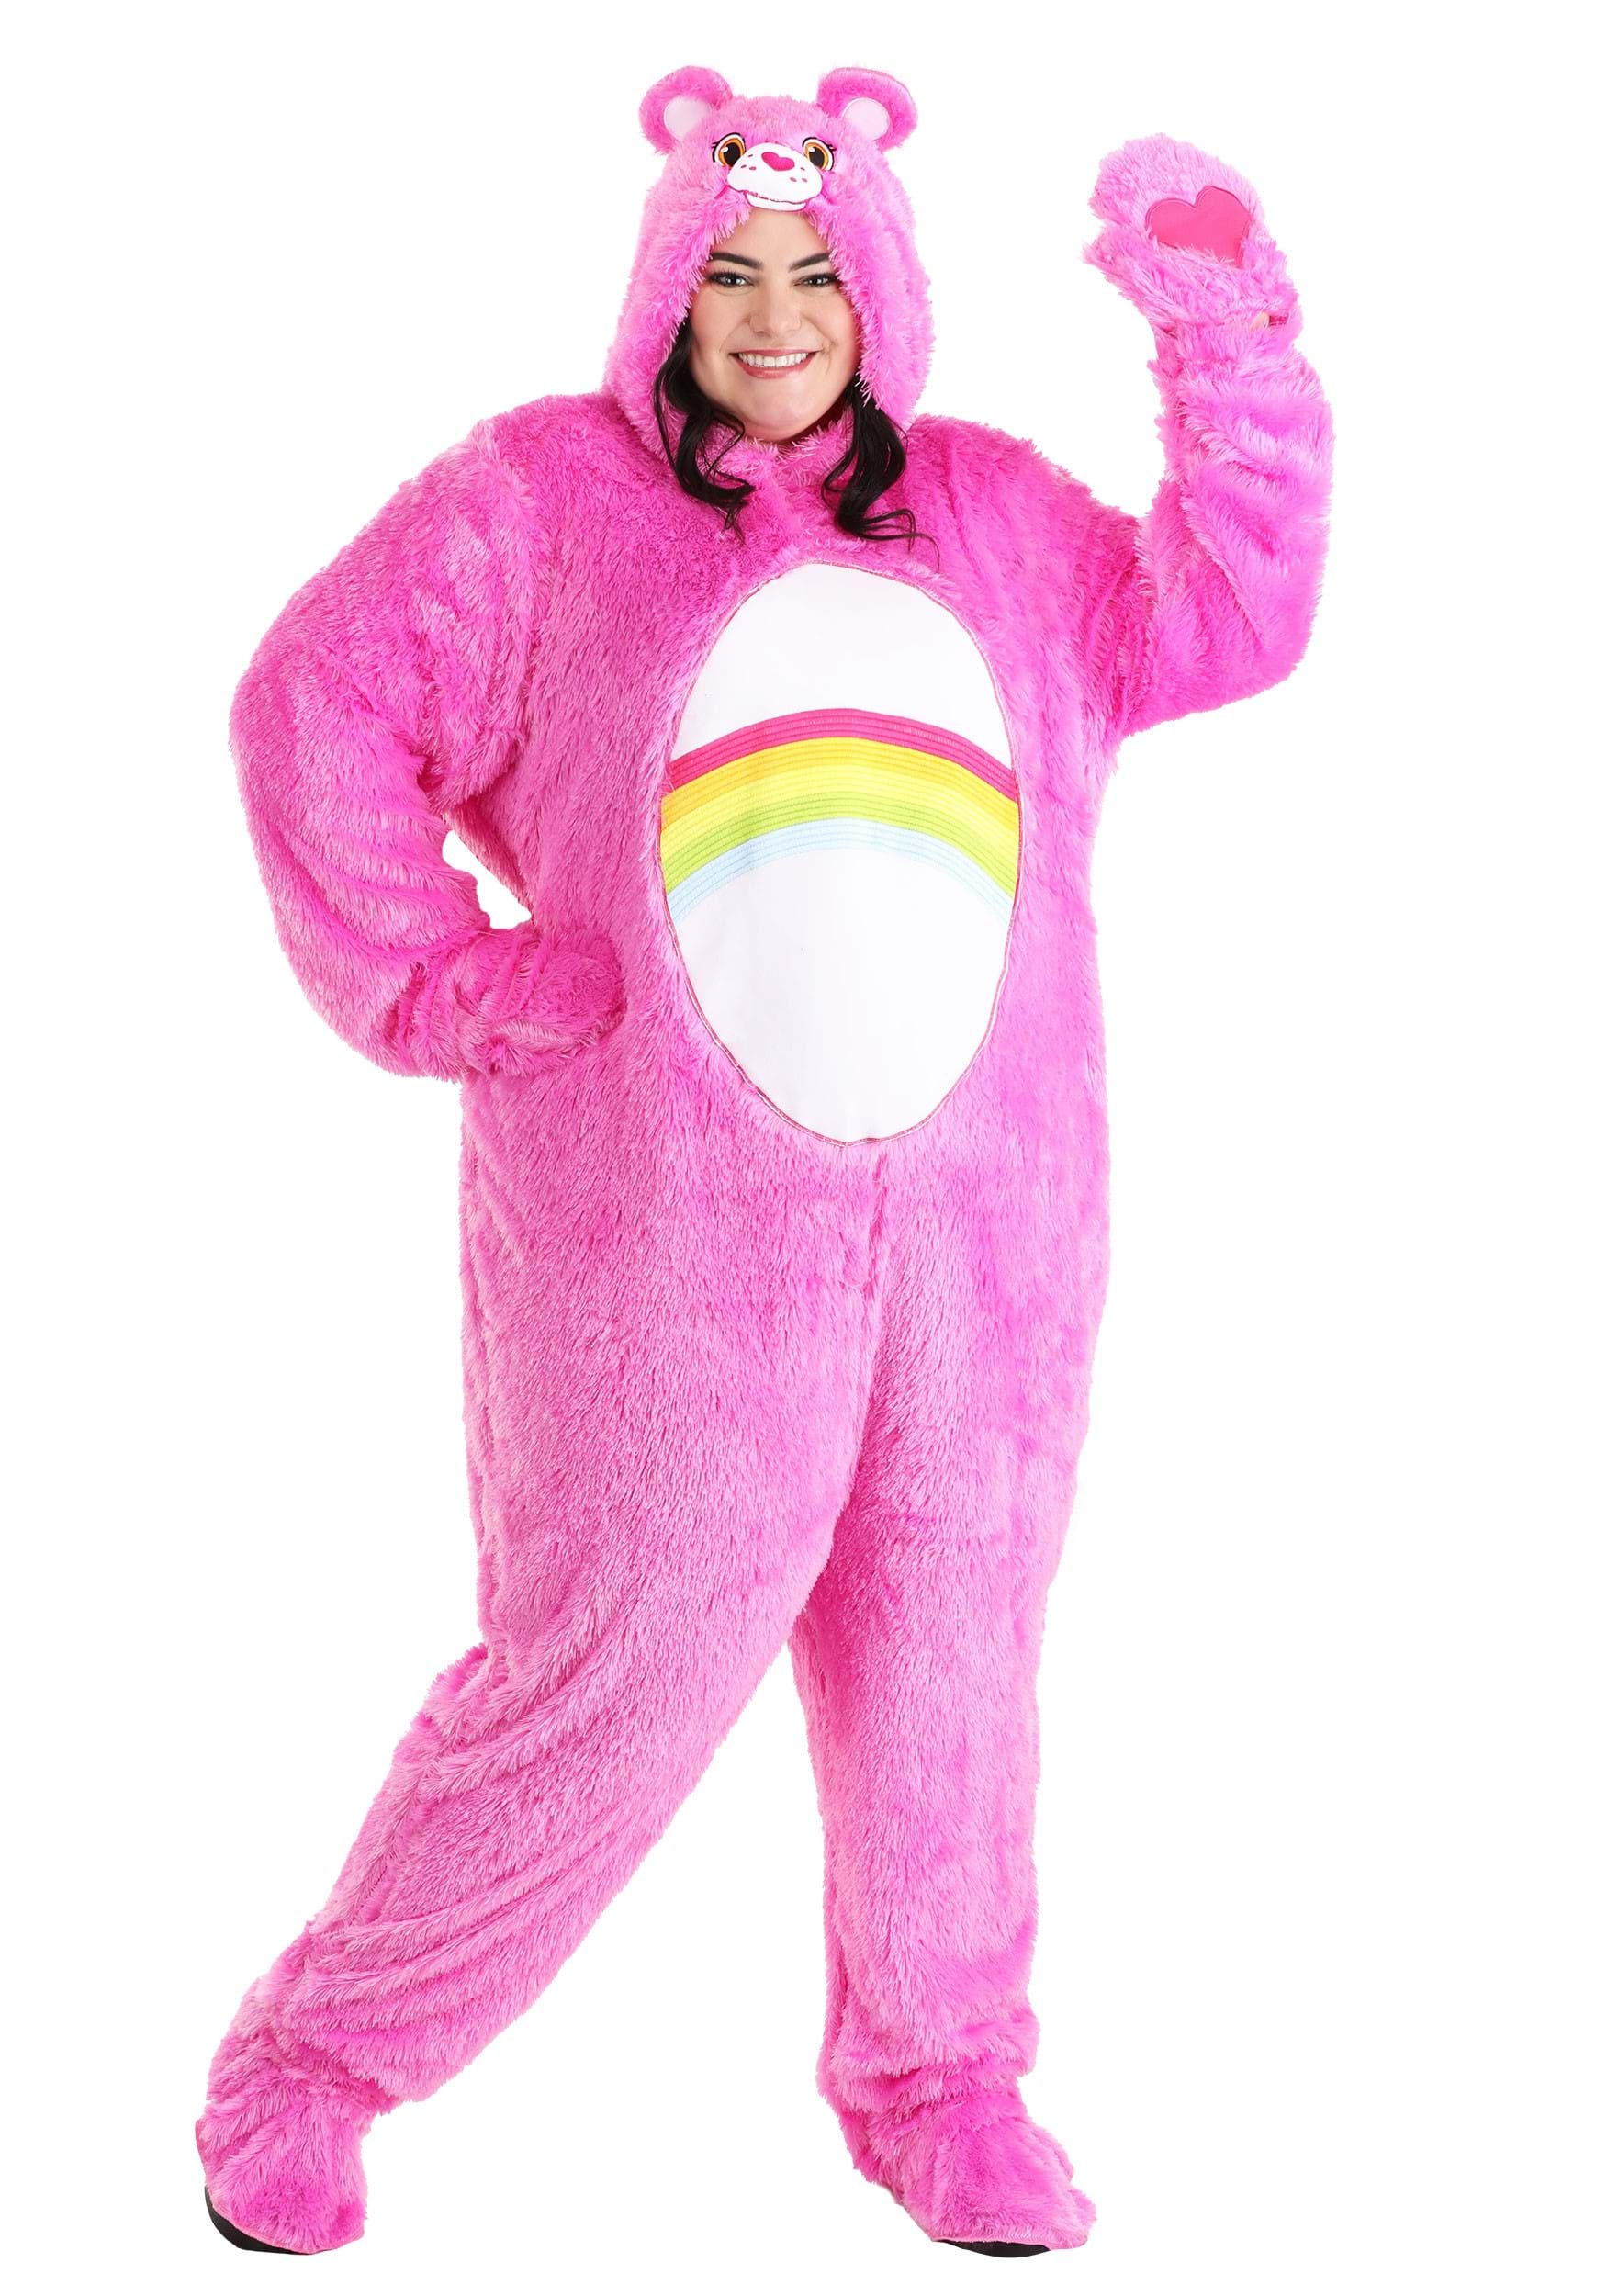 Photos - Fancy Dress CARE FUN Costumes Adult Plus Size Classic Cheer Bear  Bears Costume Pink 